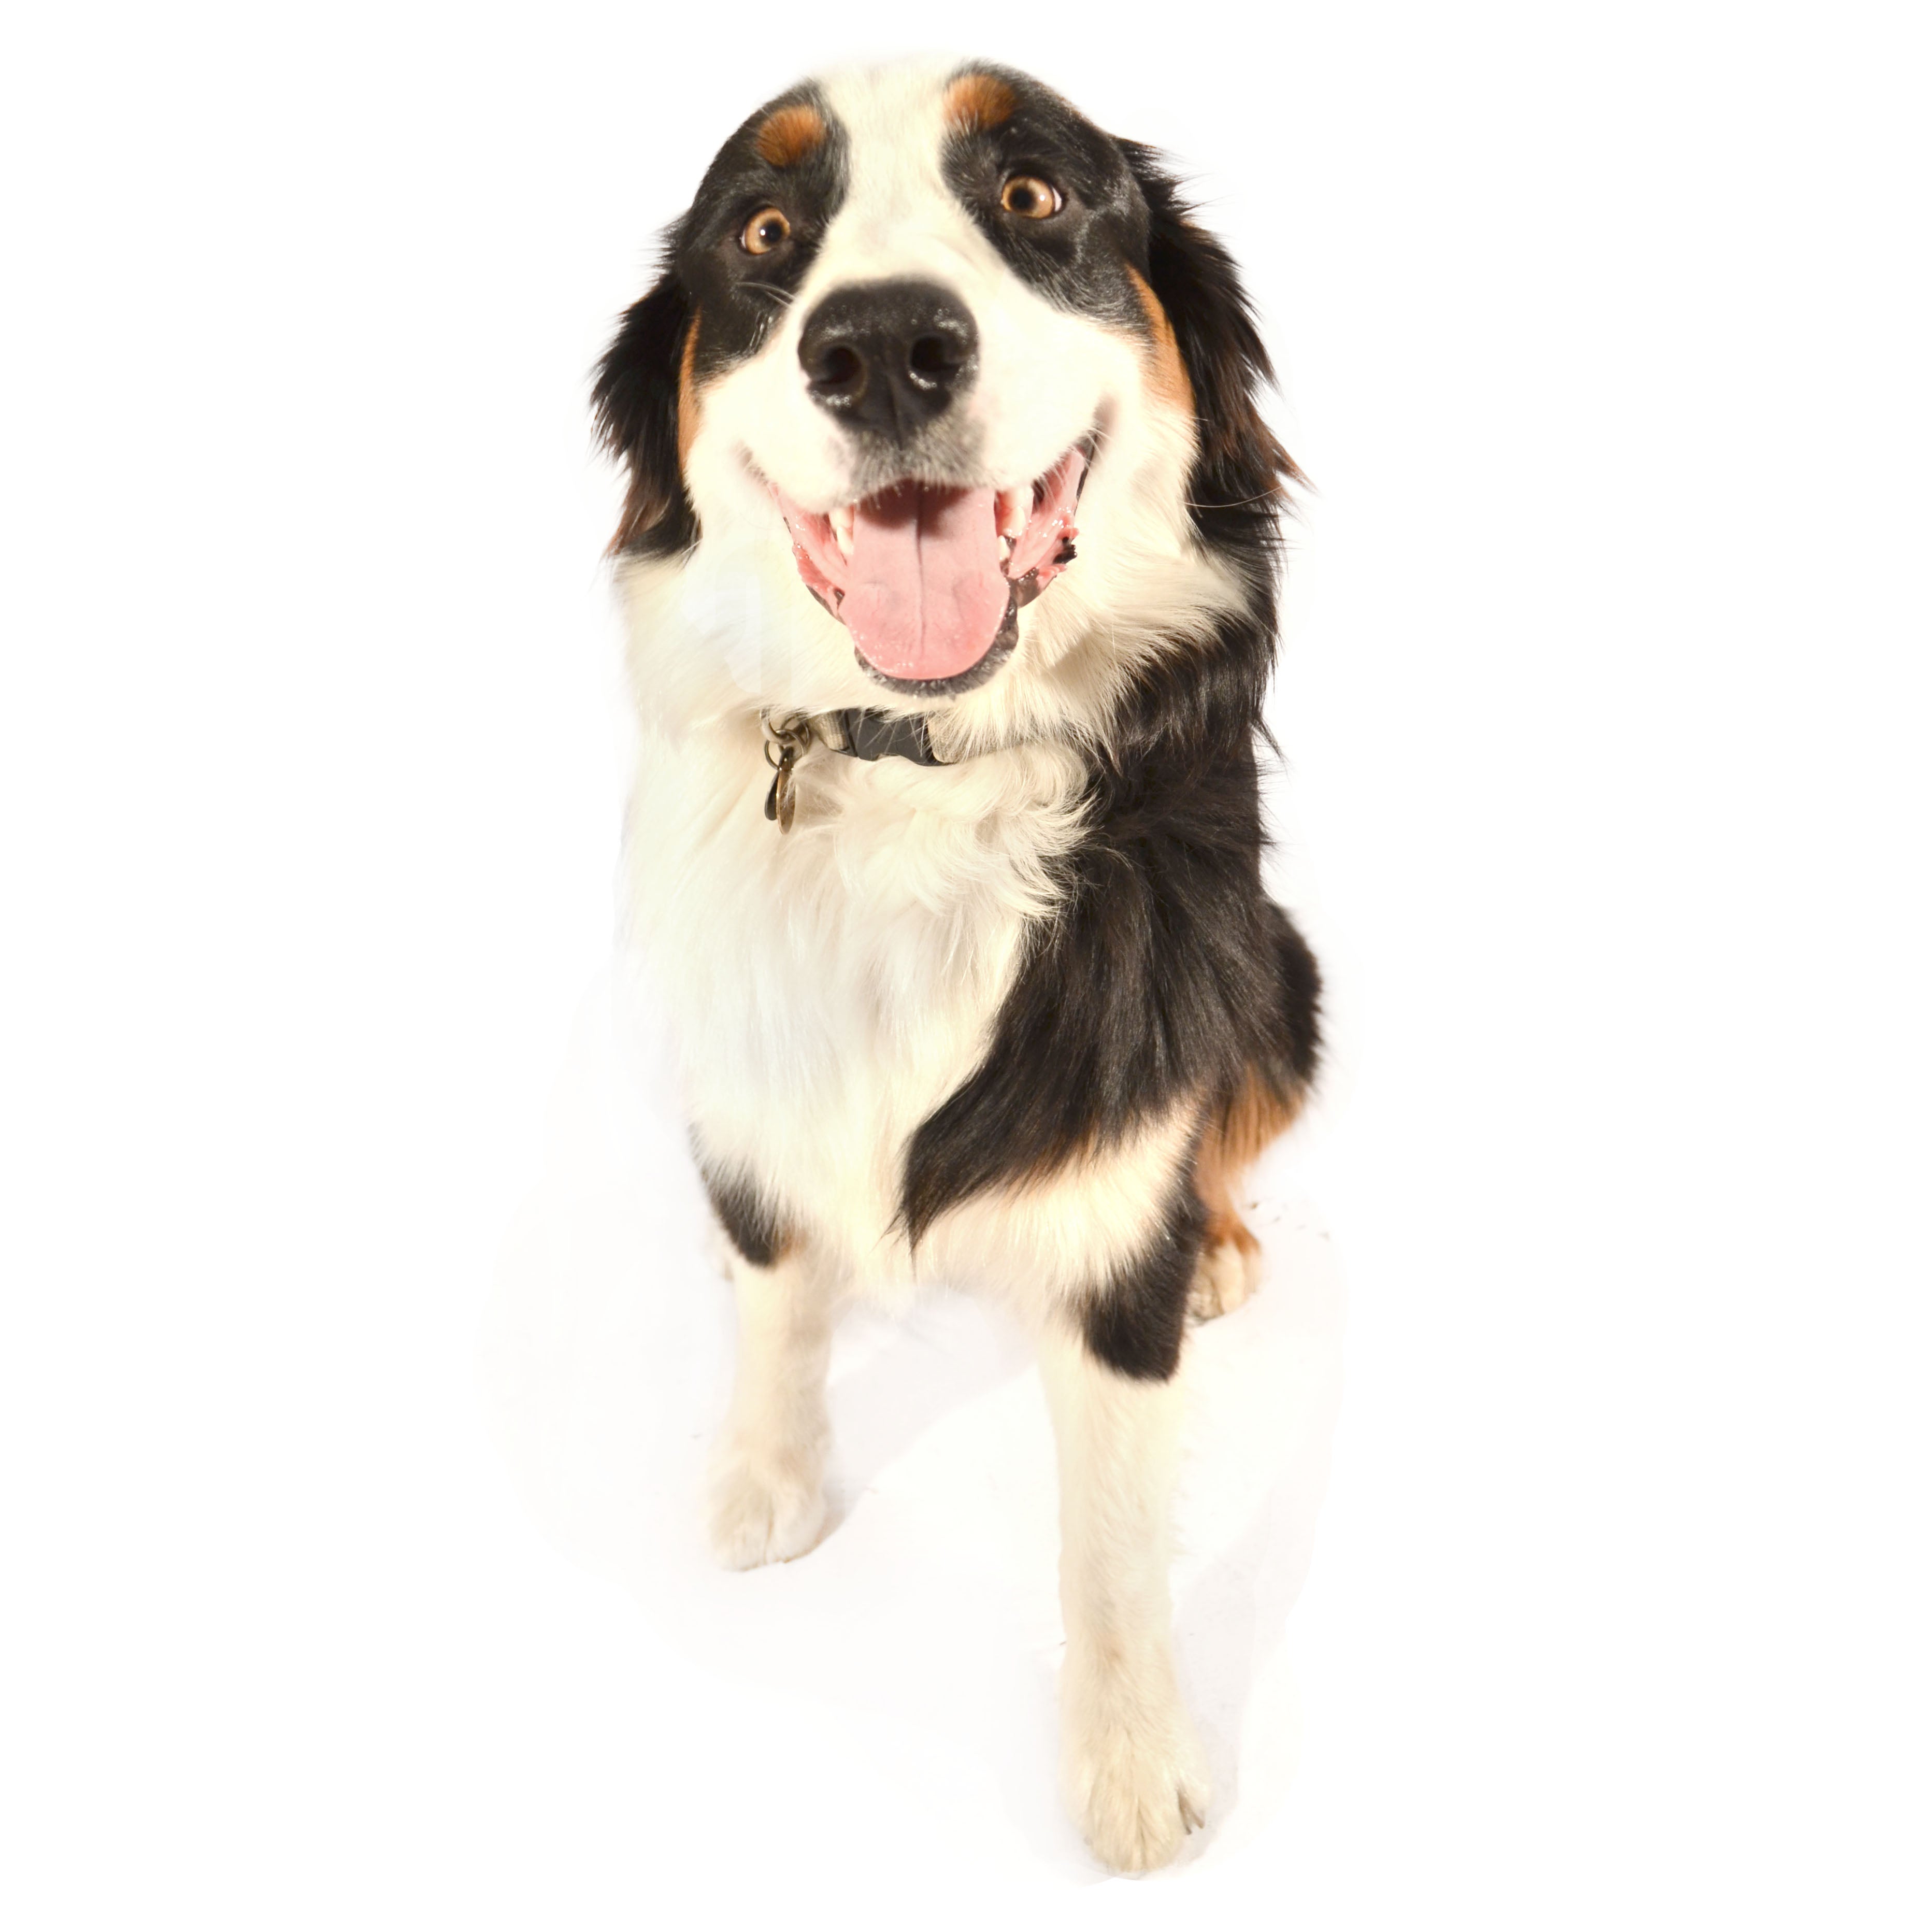 A white, black, and brown dog sitting down against a white background and looking happily at the camera.